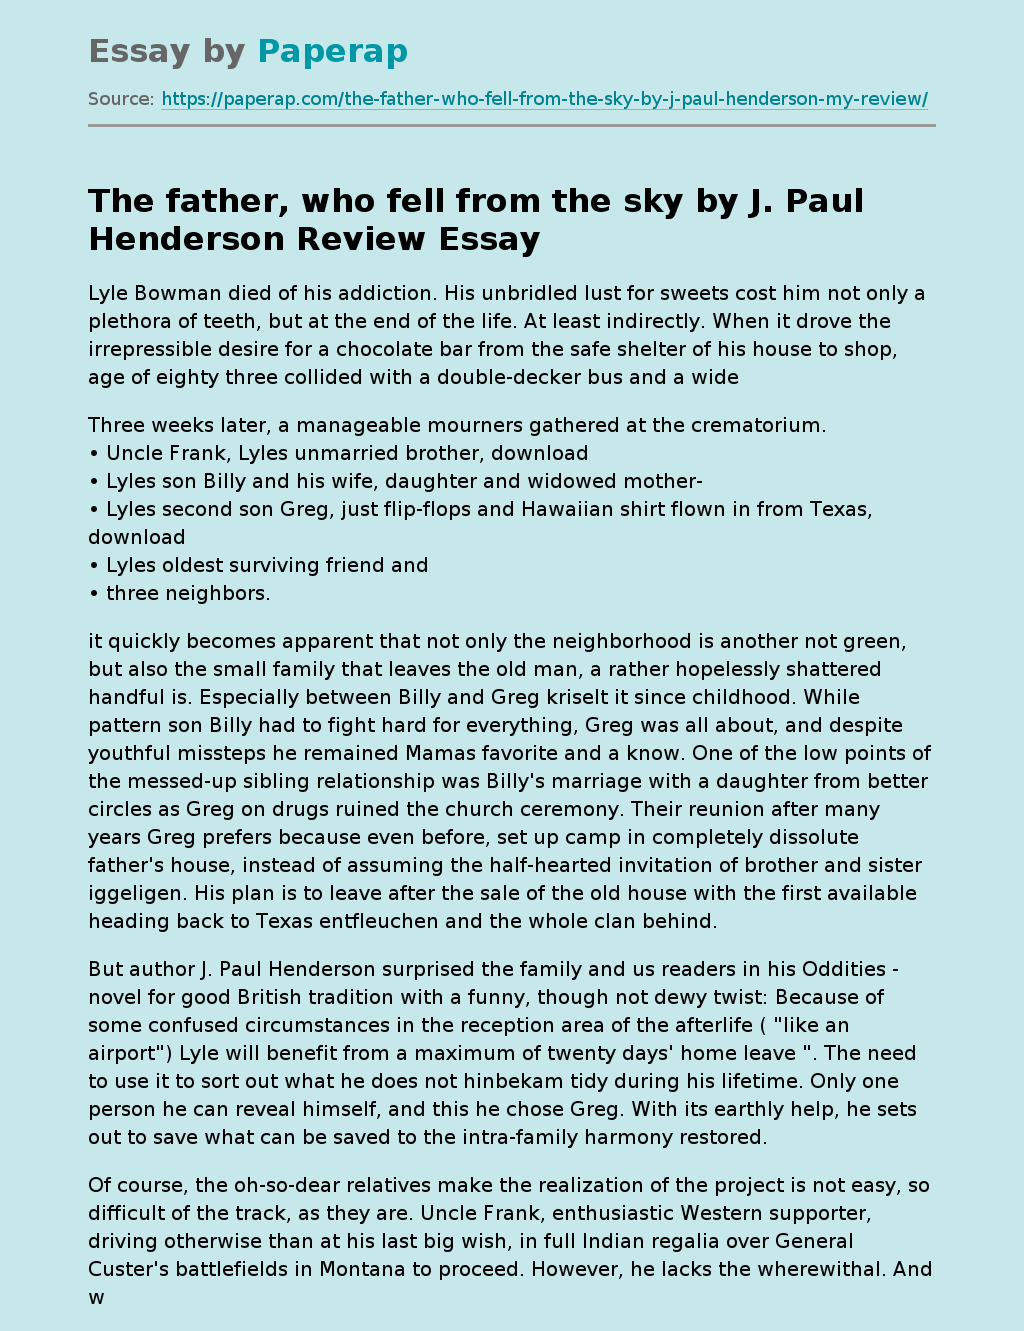 The Father, Who Fell From The Sky By J. Paul Henderson Review